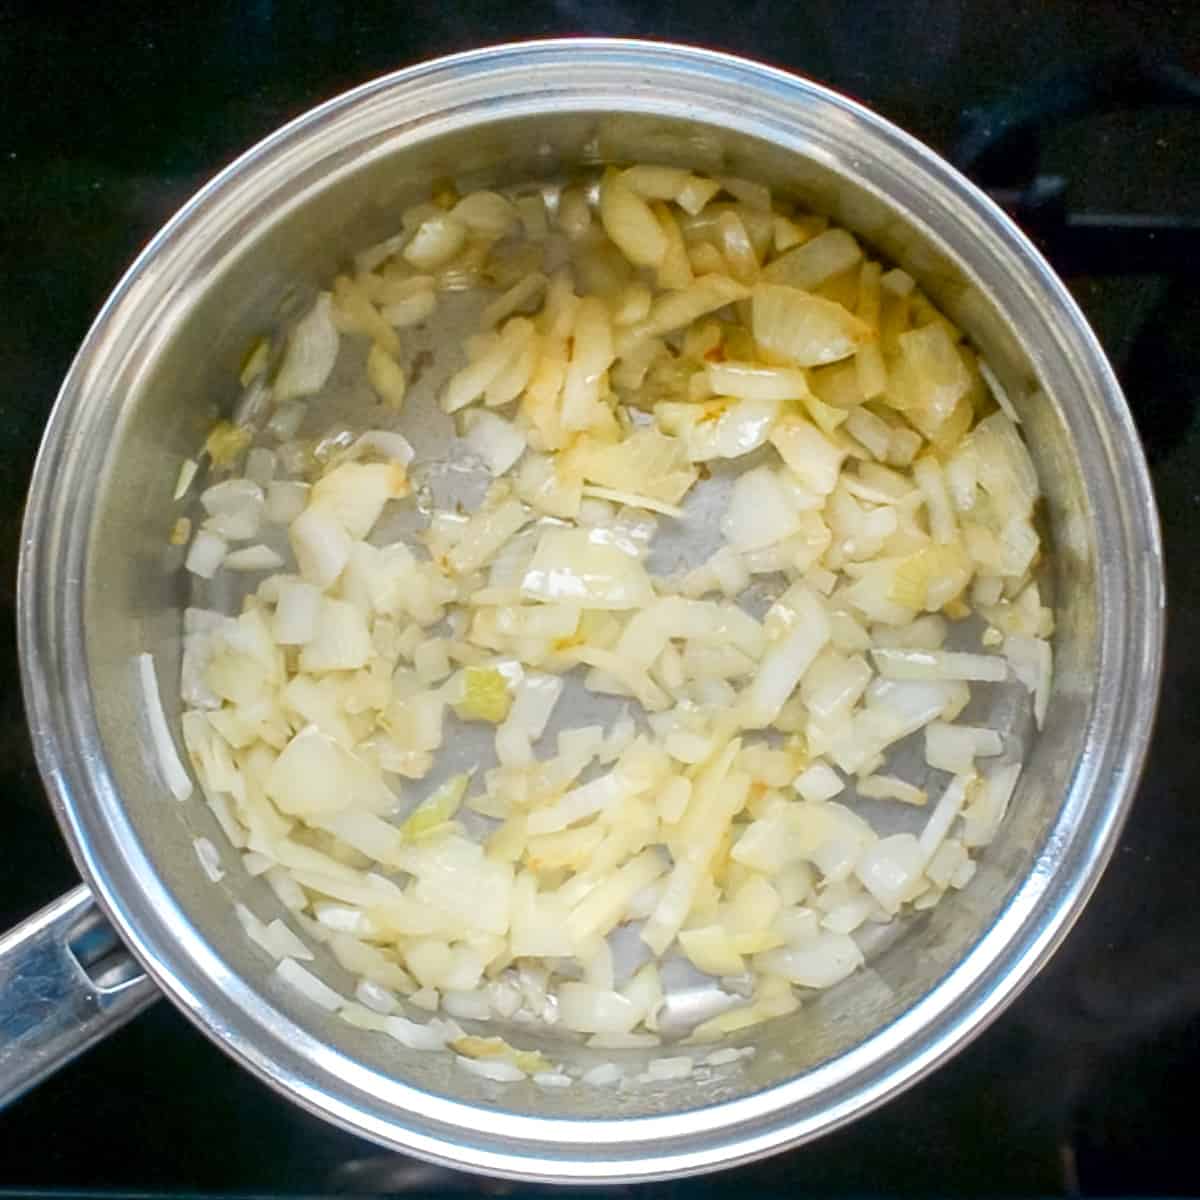 Onions sauteed to a light brown colour in a saucepan.